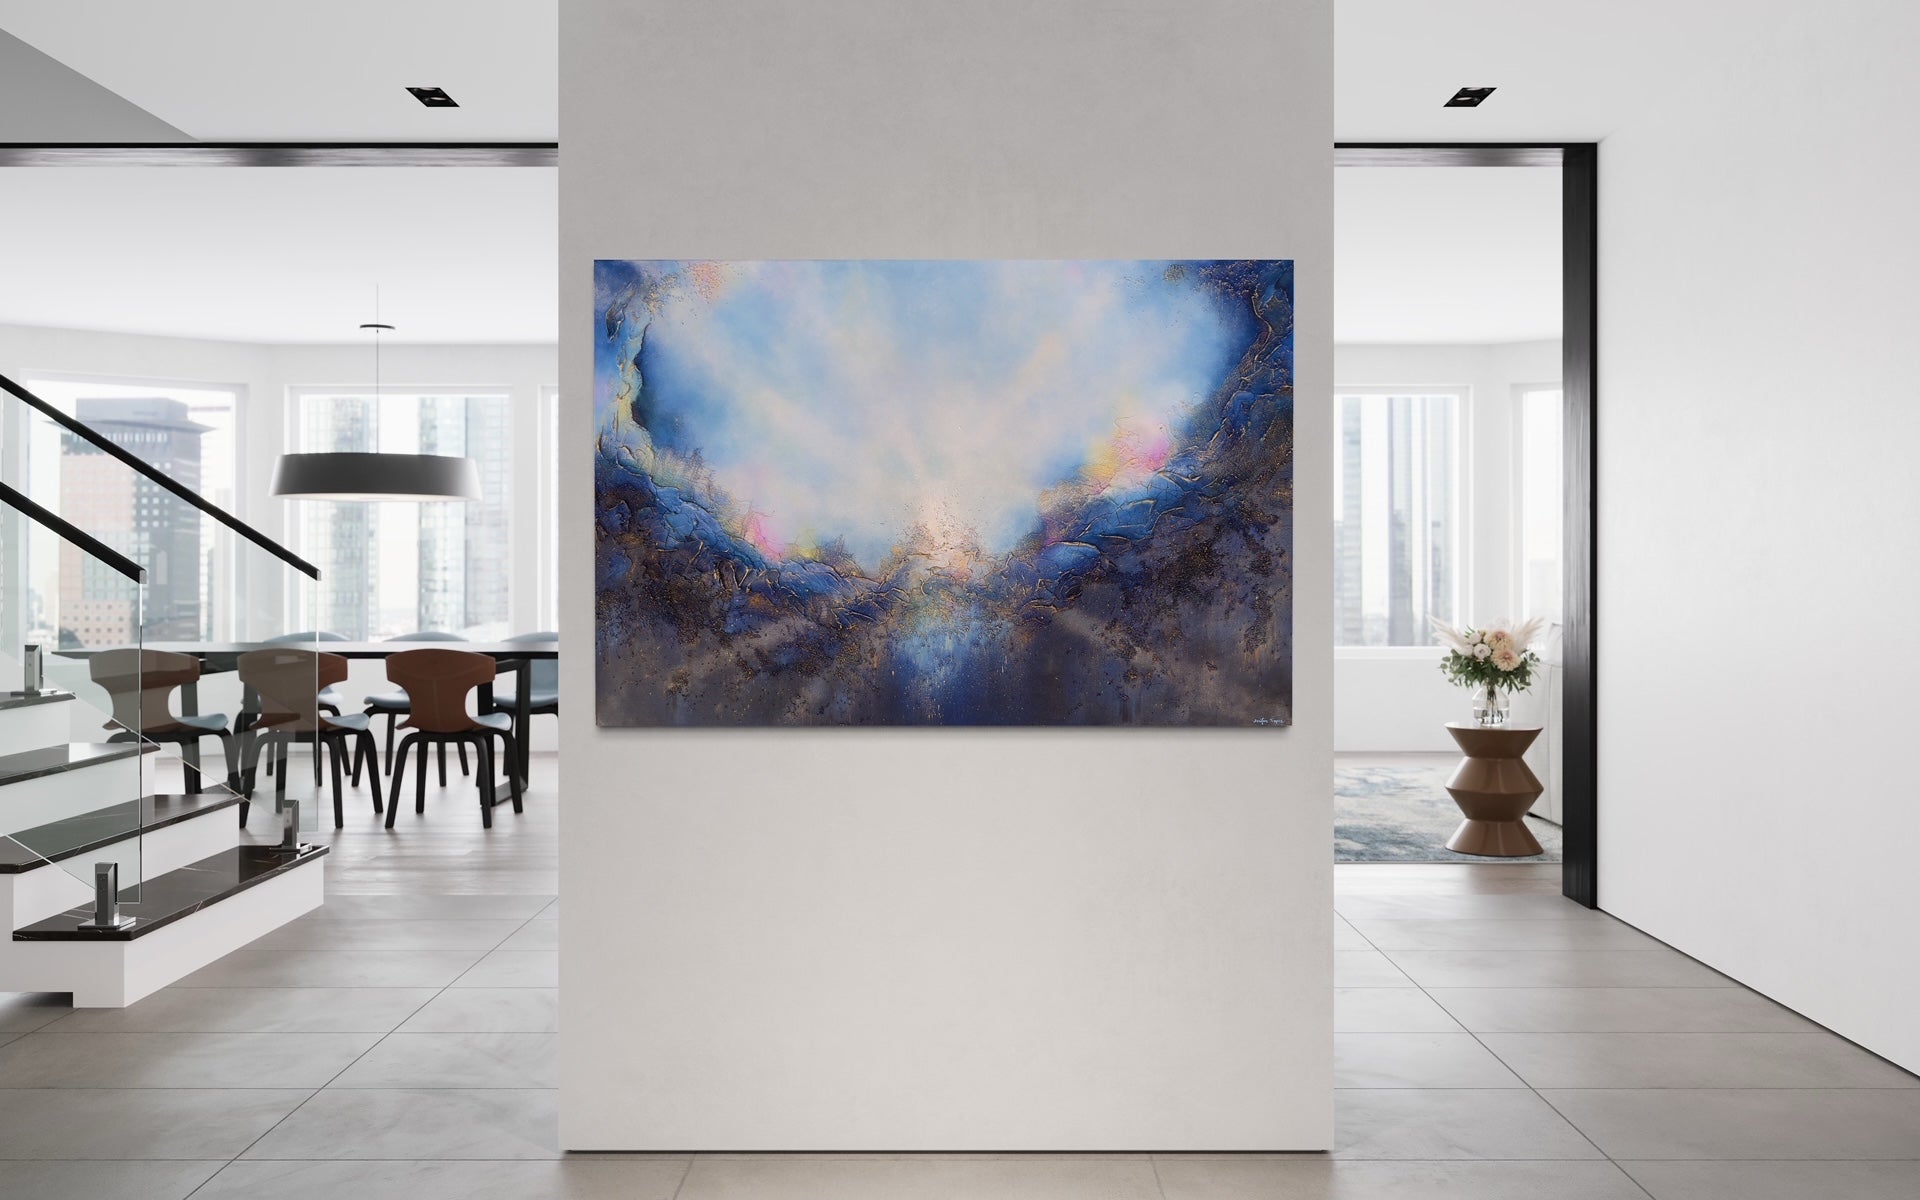 Soul's Return, a textured painting with light rays shining out from the center representing the soul's return to one's self, or the universe. Blue, pink, white, dark blue, textured painting. Ephemeral art, art with meaning, soul artist. Jennifer Tepper Fine Art.